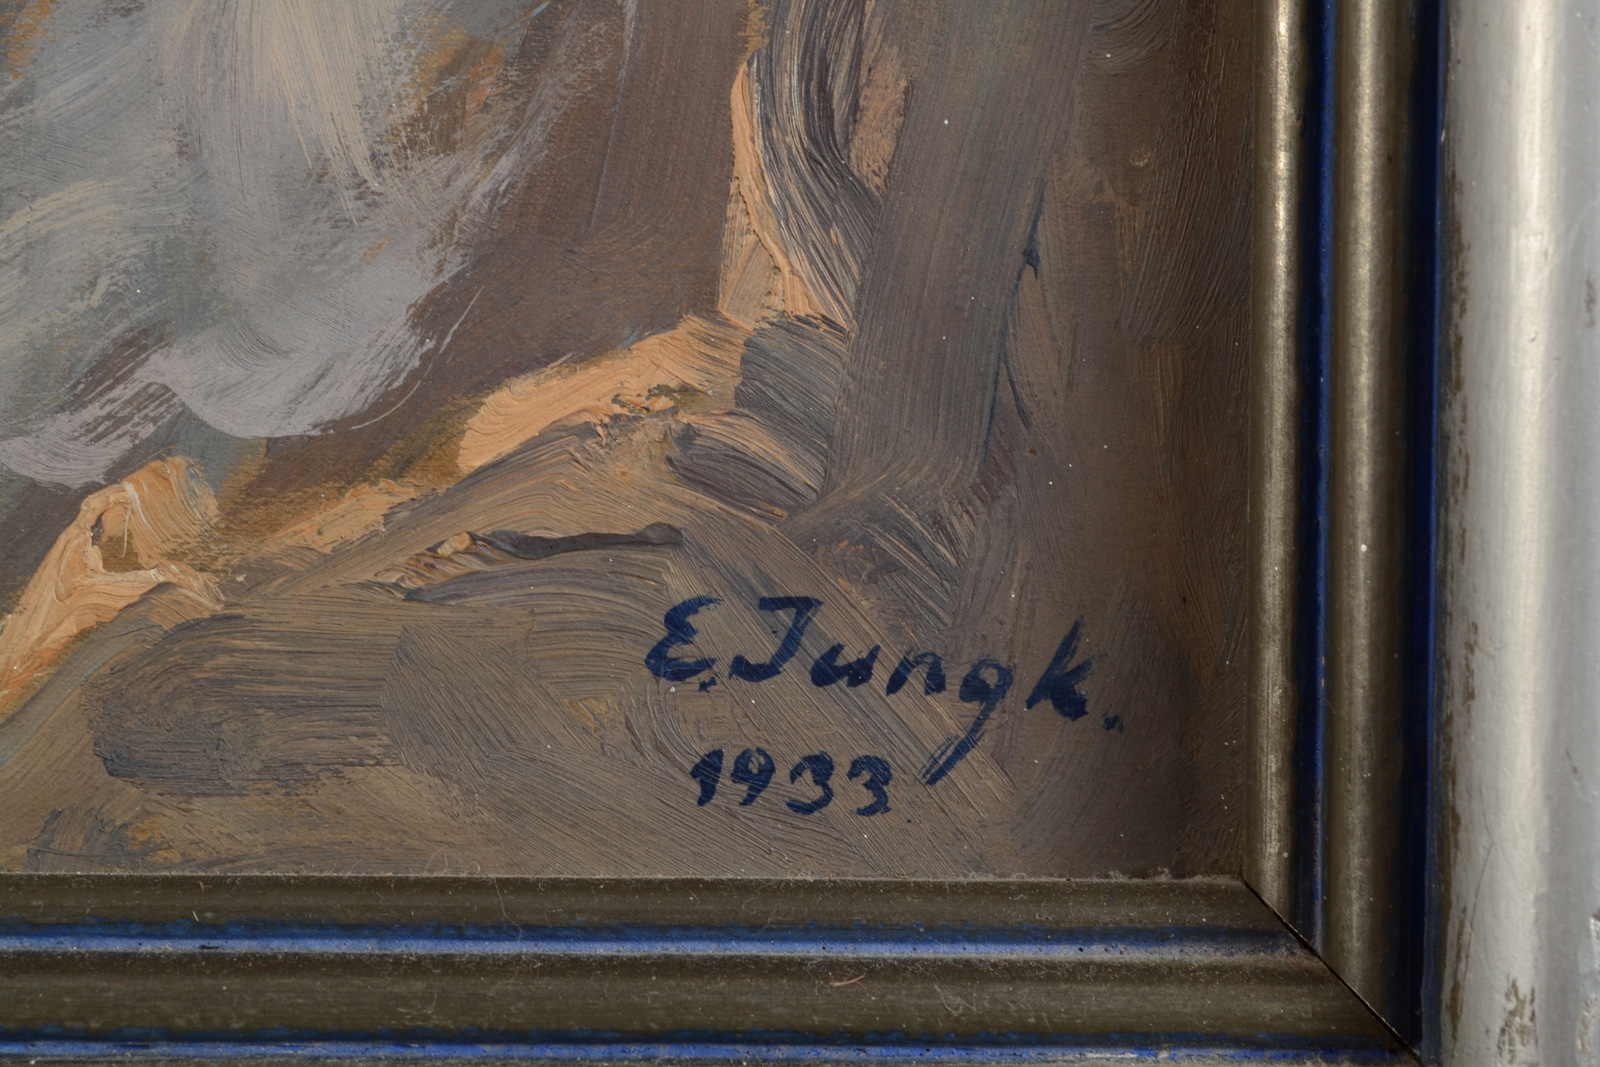 ELFRIEDE JUNGK Canyon Landscape Oil on board Signed and dated 1933 46 x 37 cm - Image 3 of 3